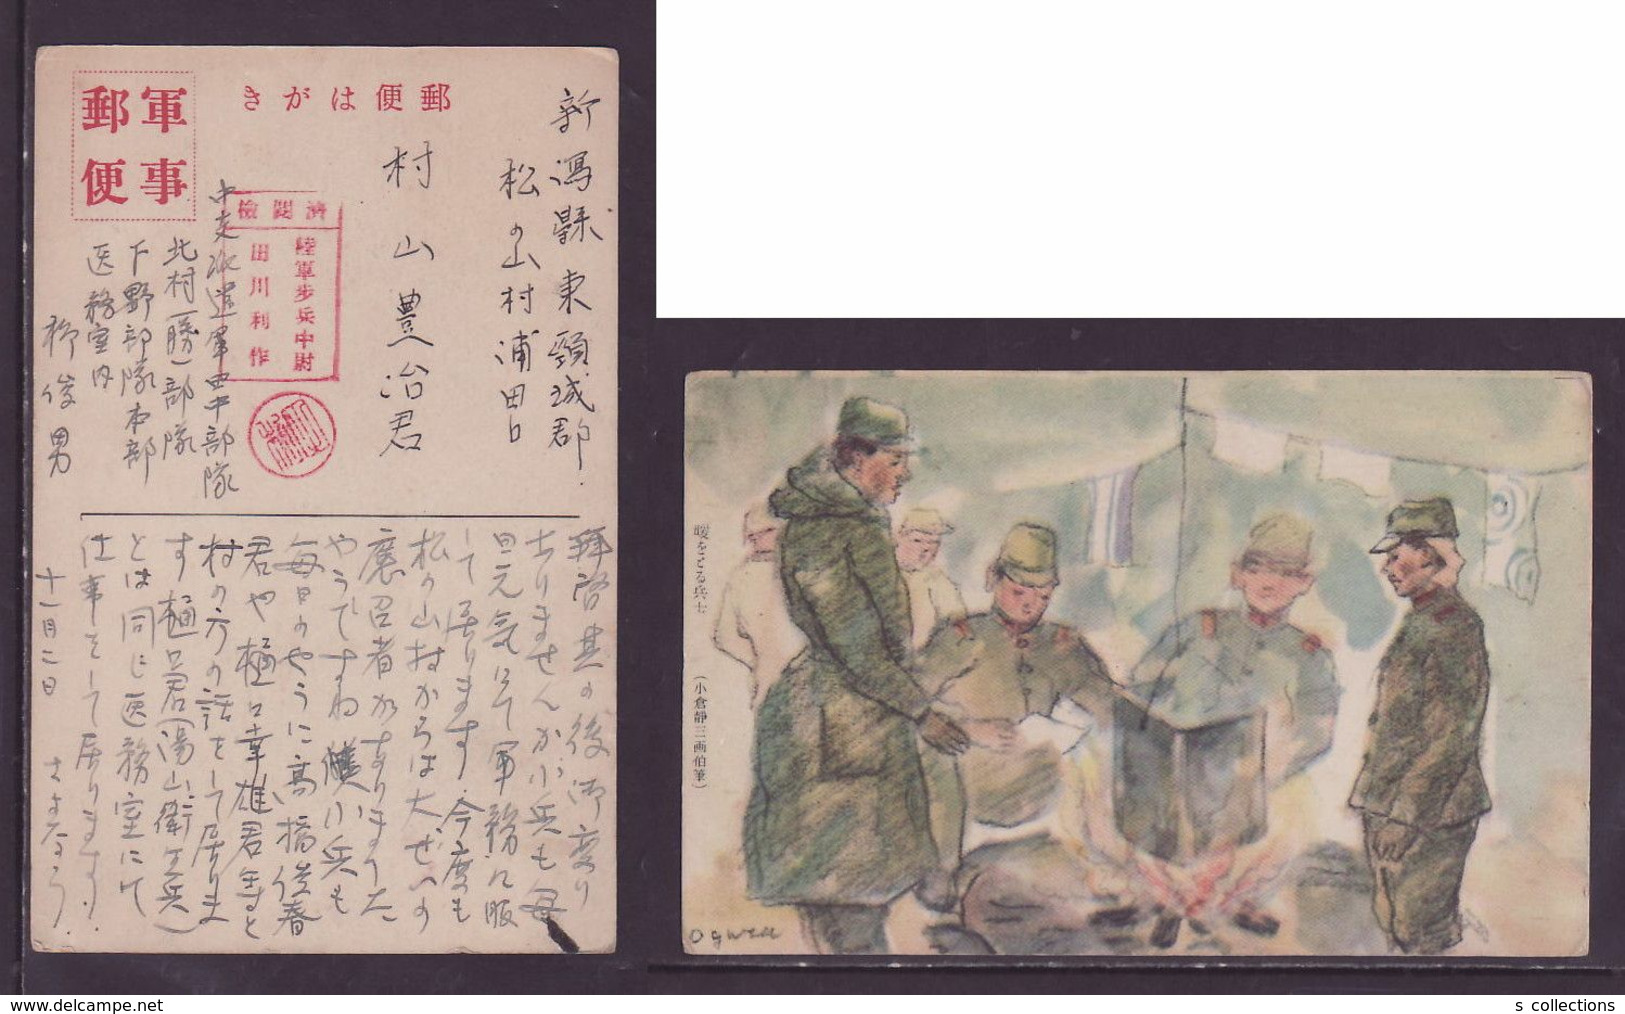 JAPAN WWII Military Japanese Soldier Picture Postcard Central ChinaWW2 MANCHURIA CHINE MANDCHOUKOUO JAPON GIAPPONE - 1941-45 Cina Del Nord